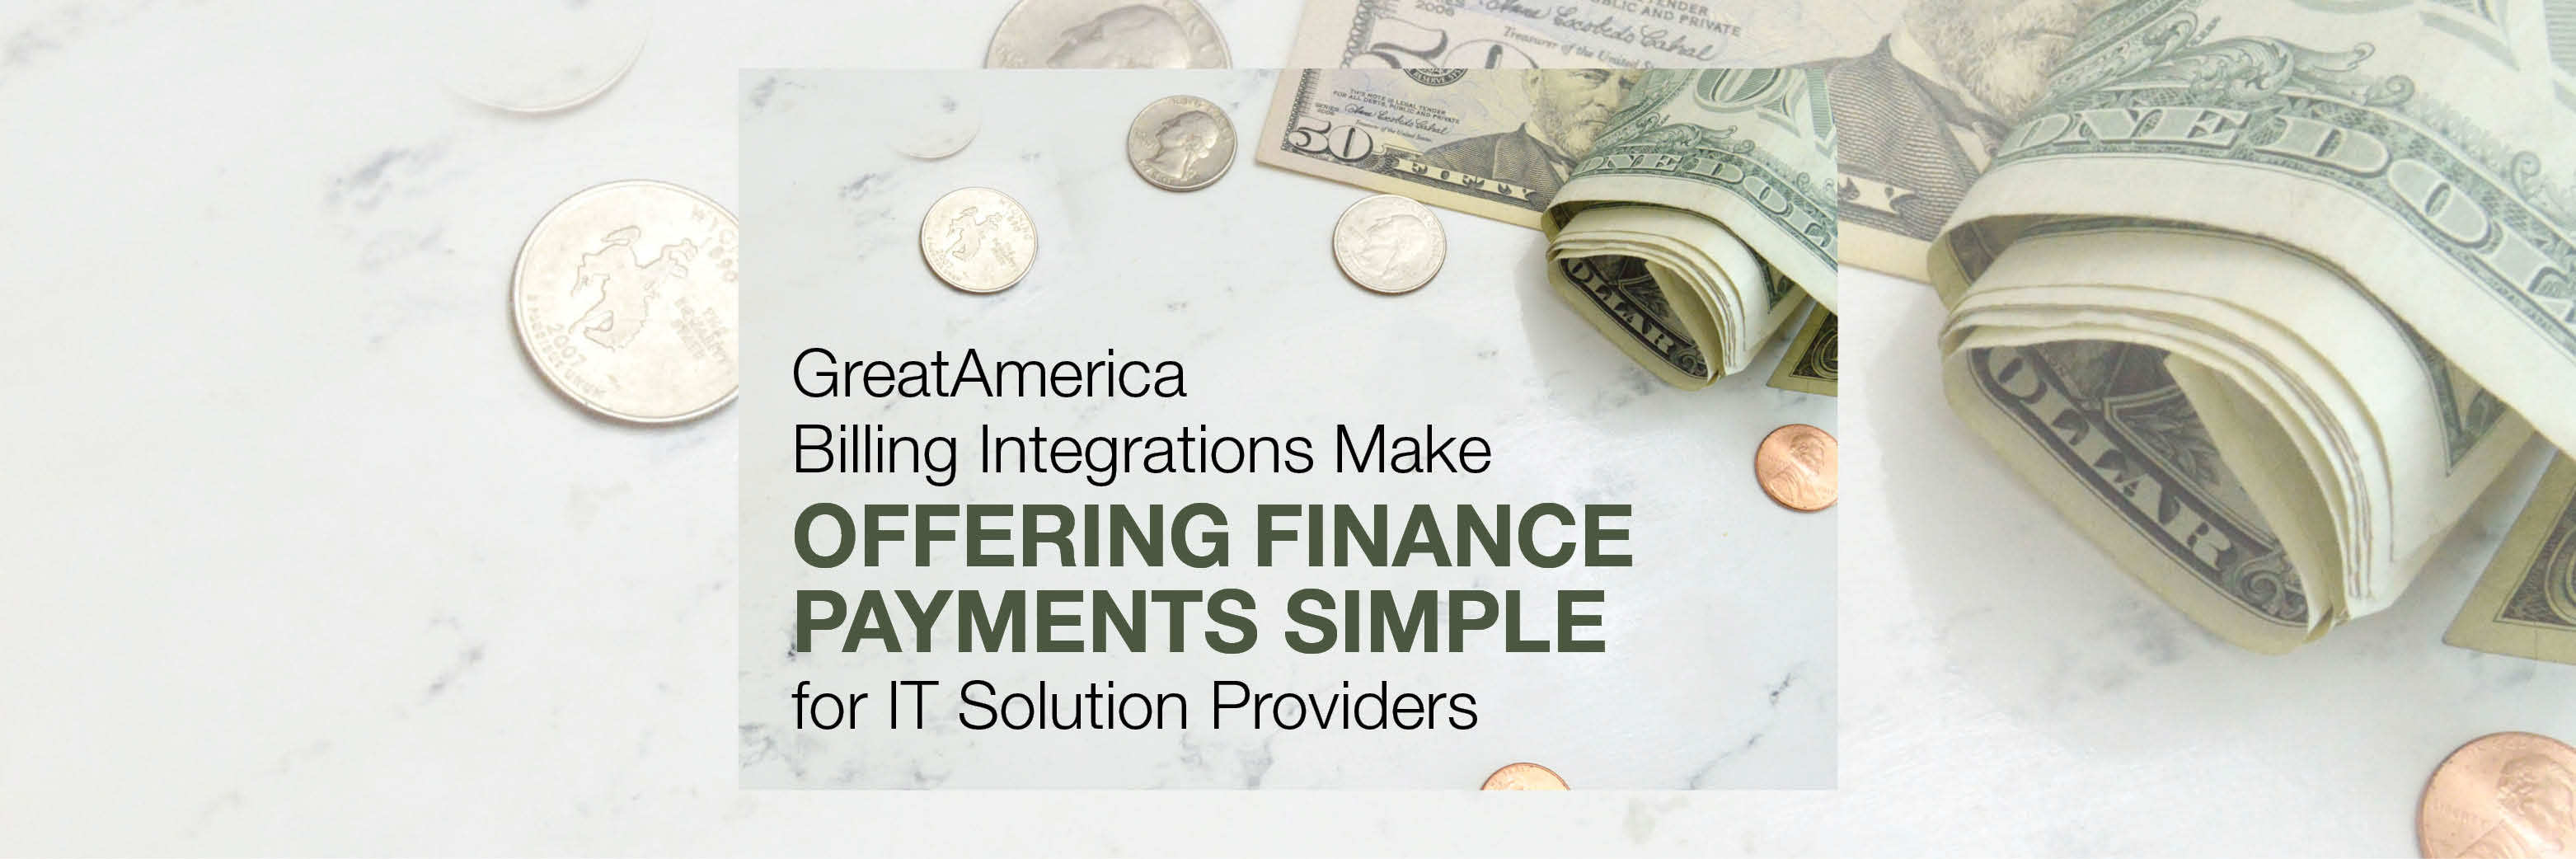 GreatAmerica Billing Integrations Make Offering Finance Payments Simple for IT Solution Providers